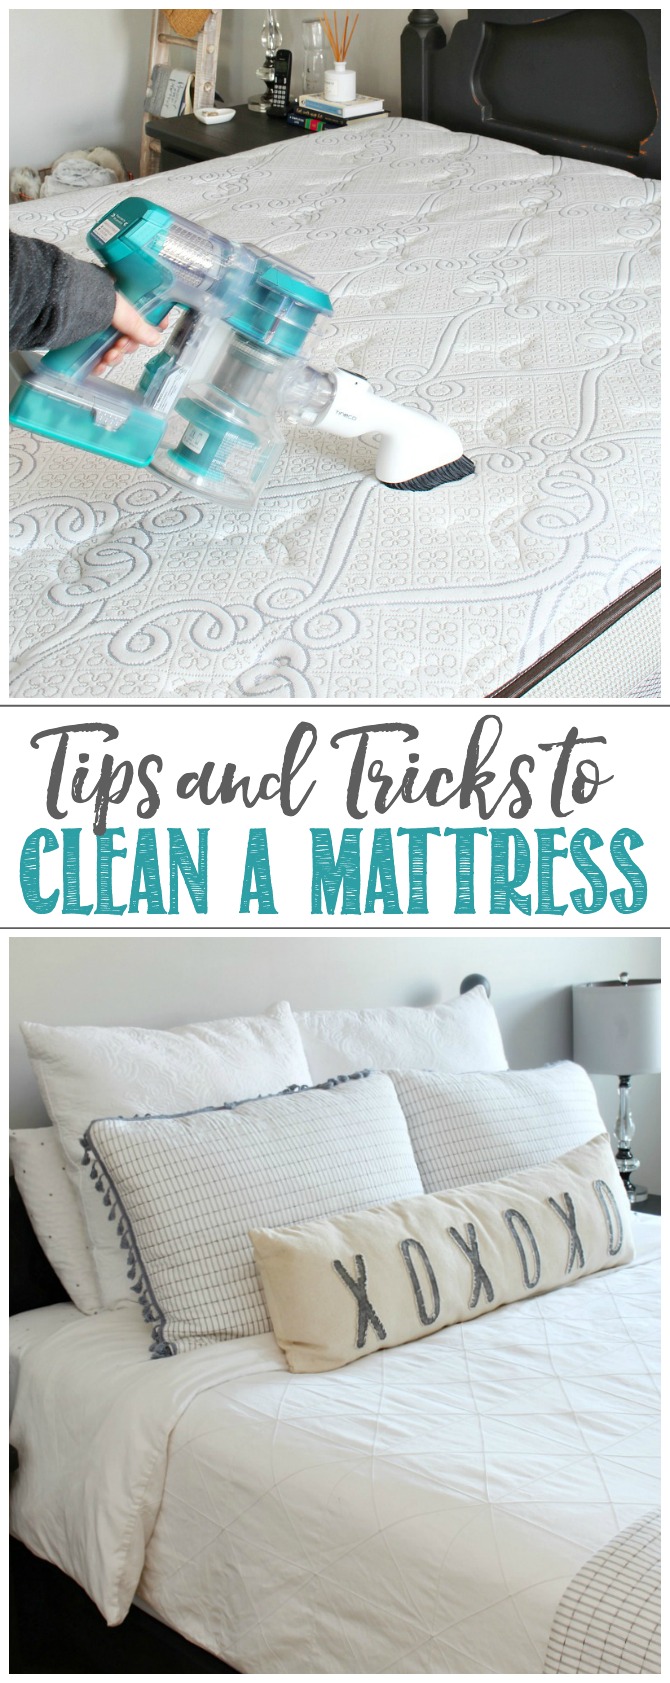 Tips and tricks to clean a mattress.